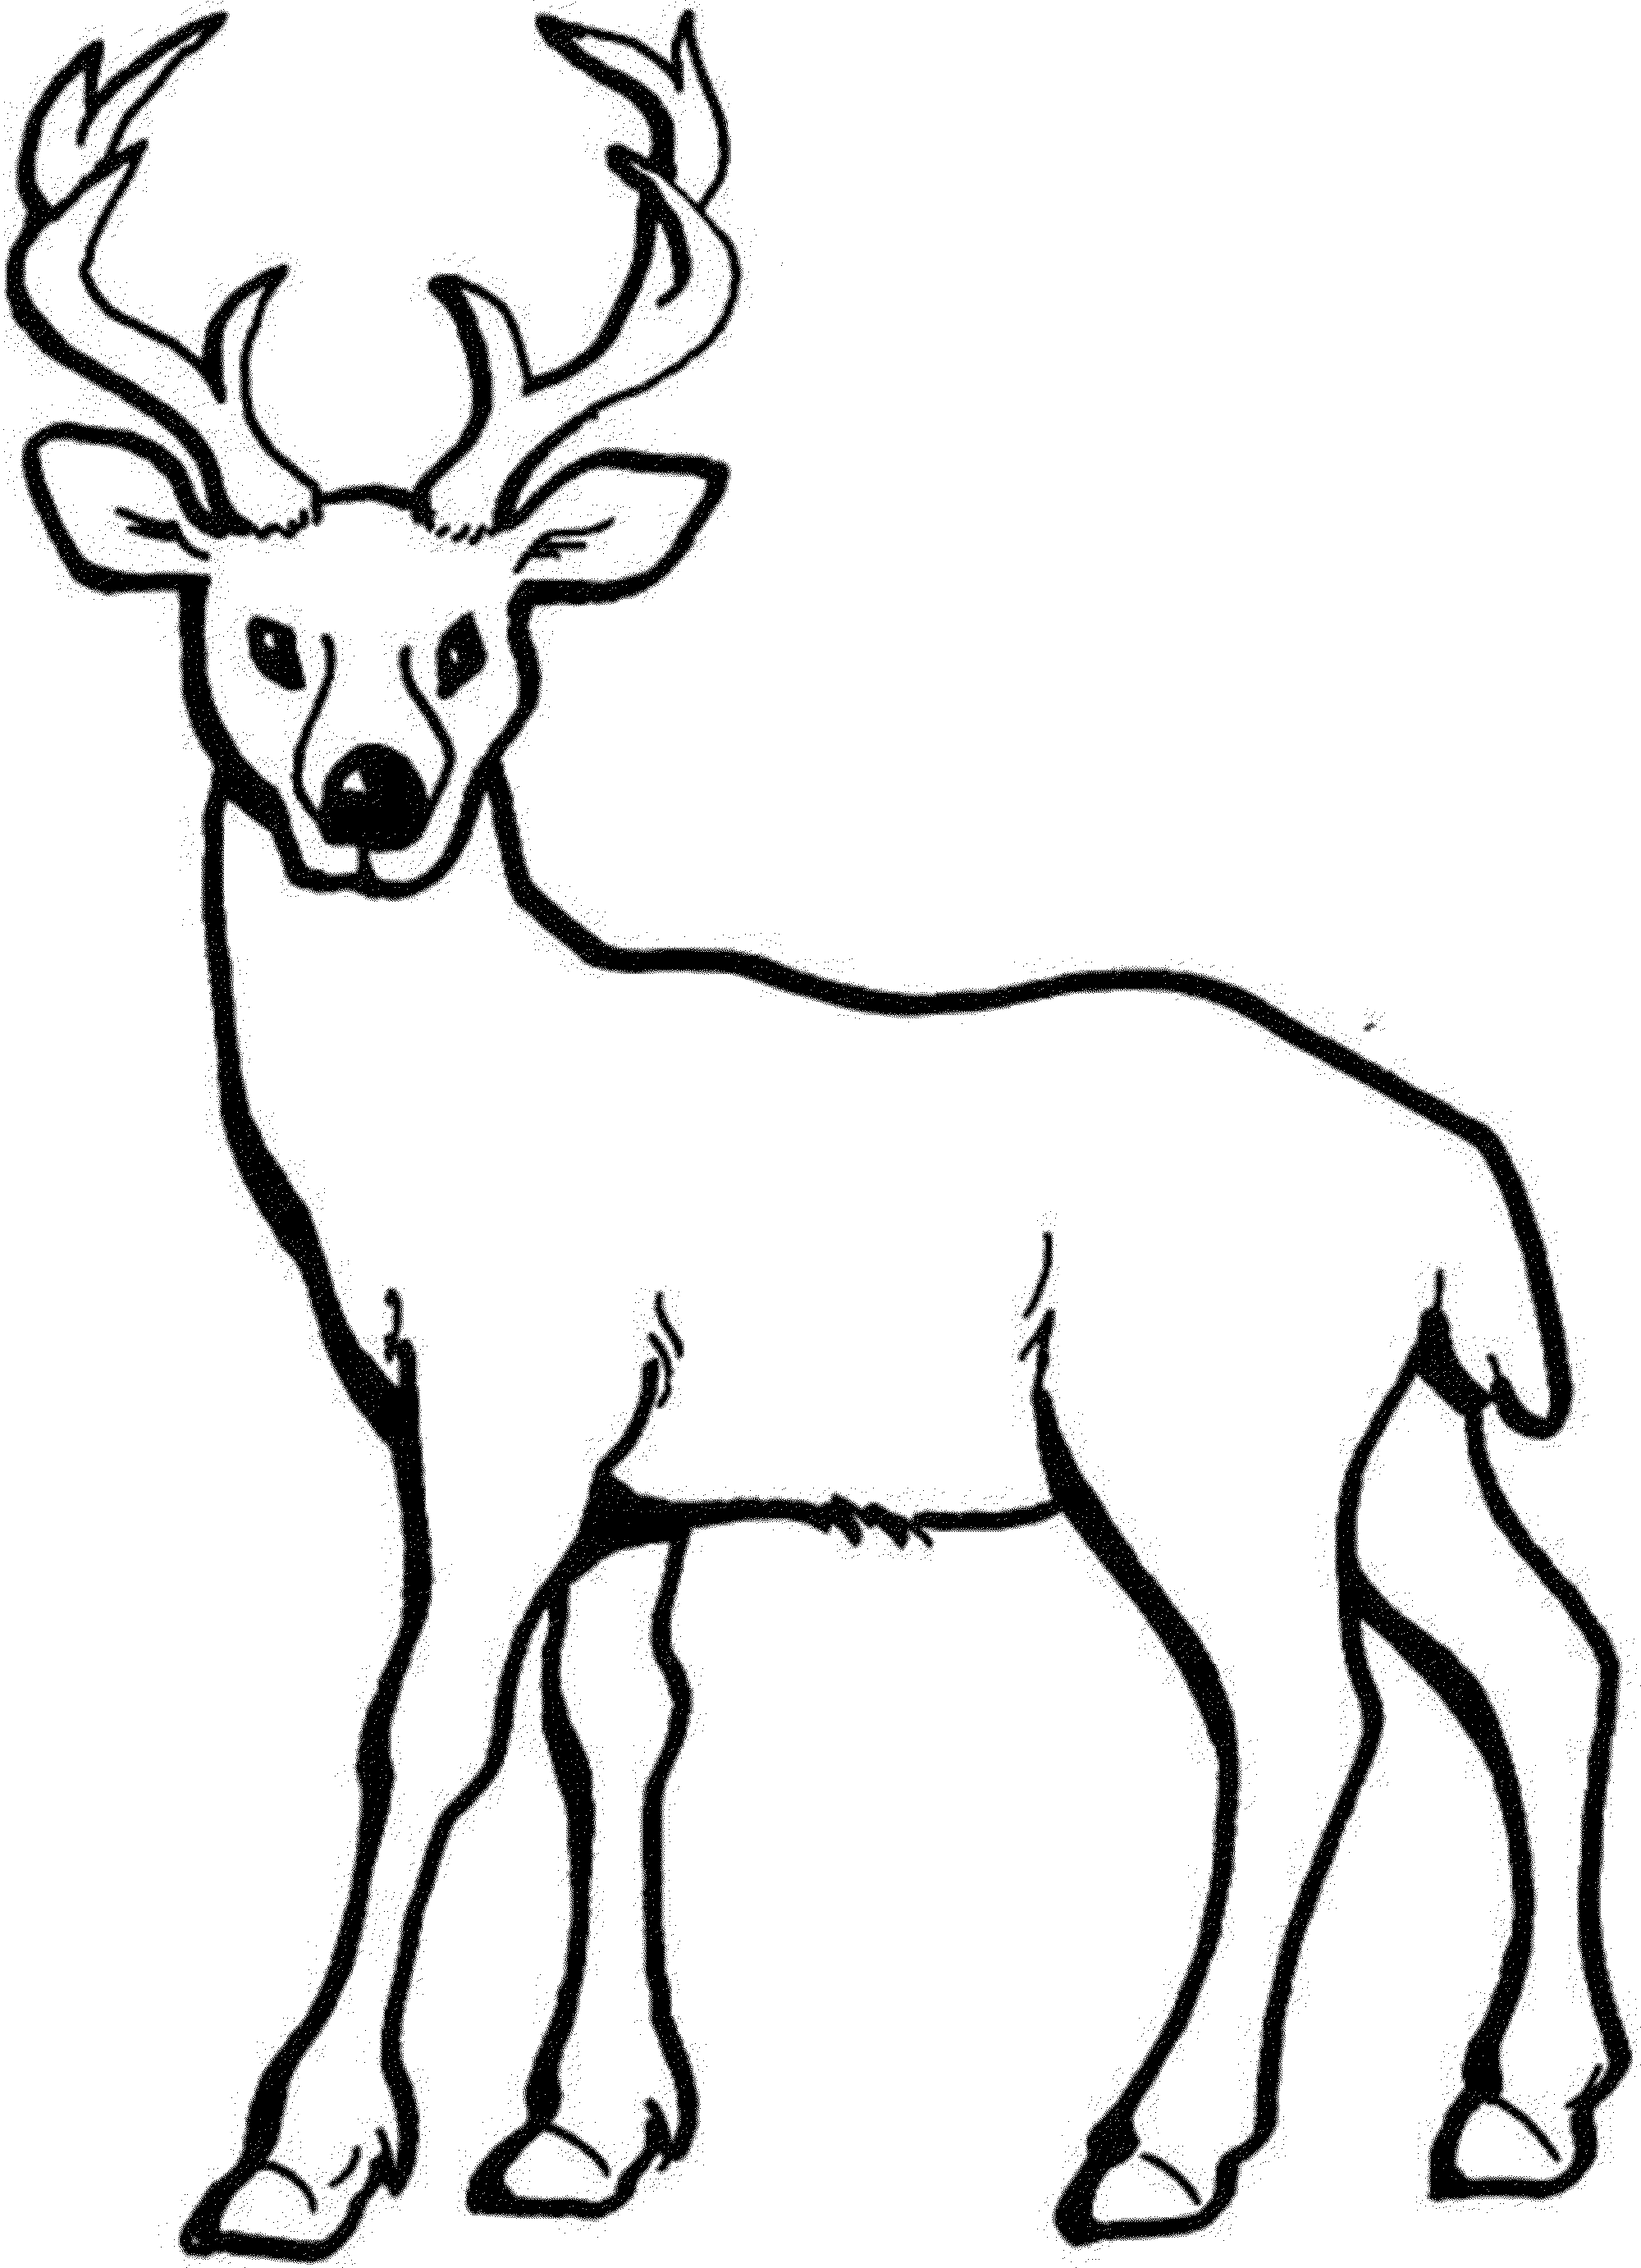 mule deer coloring page animal coloring pages mule deer deer coloring pages mule page coloring deer 